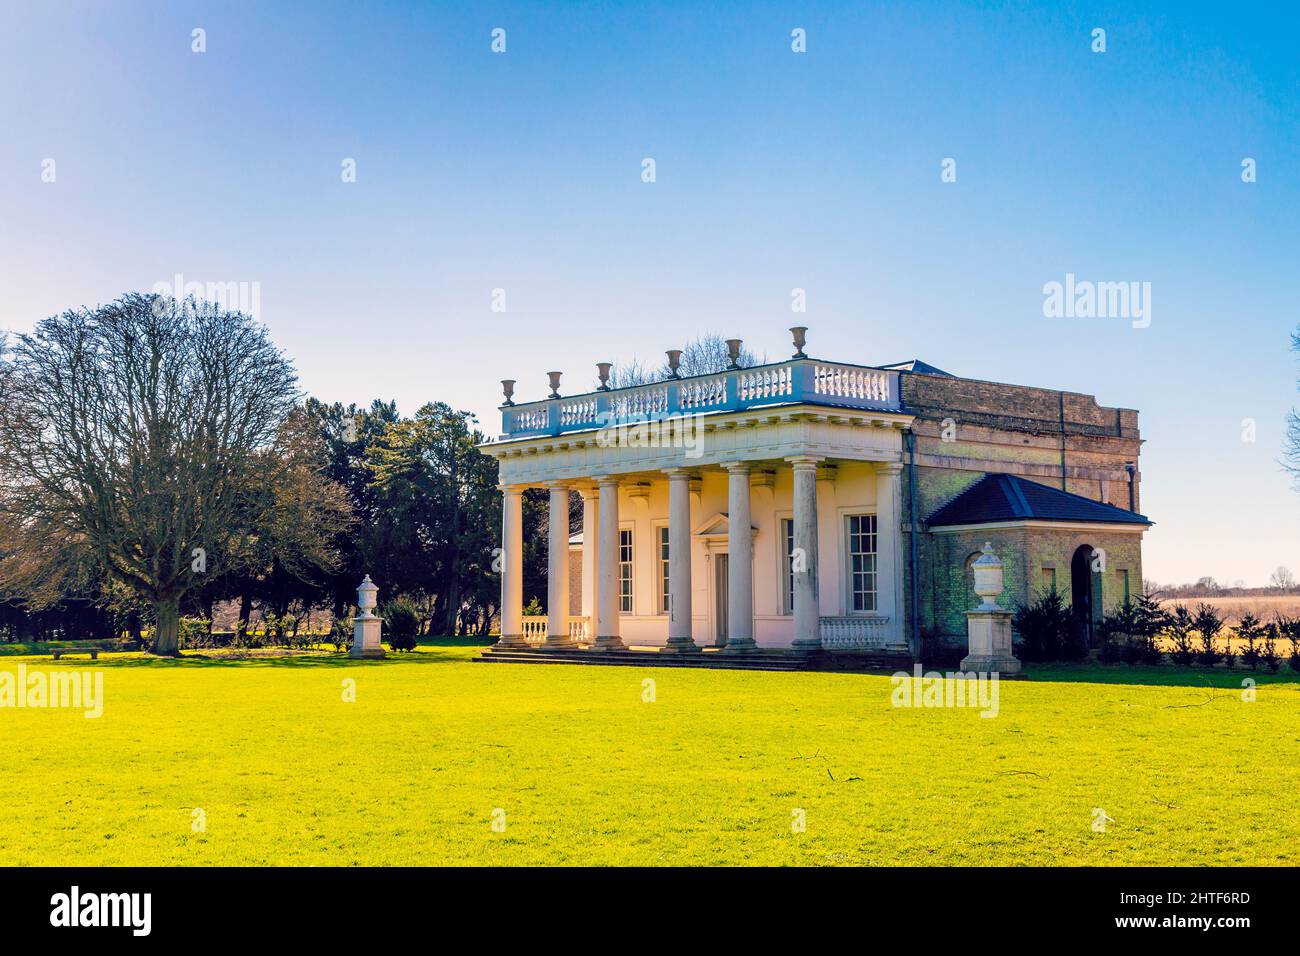 Bowling Green House built in 1735 by Batty Langley at Wrest Park, Bedfordshire, UK Stock Photo